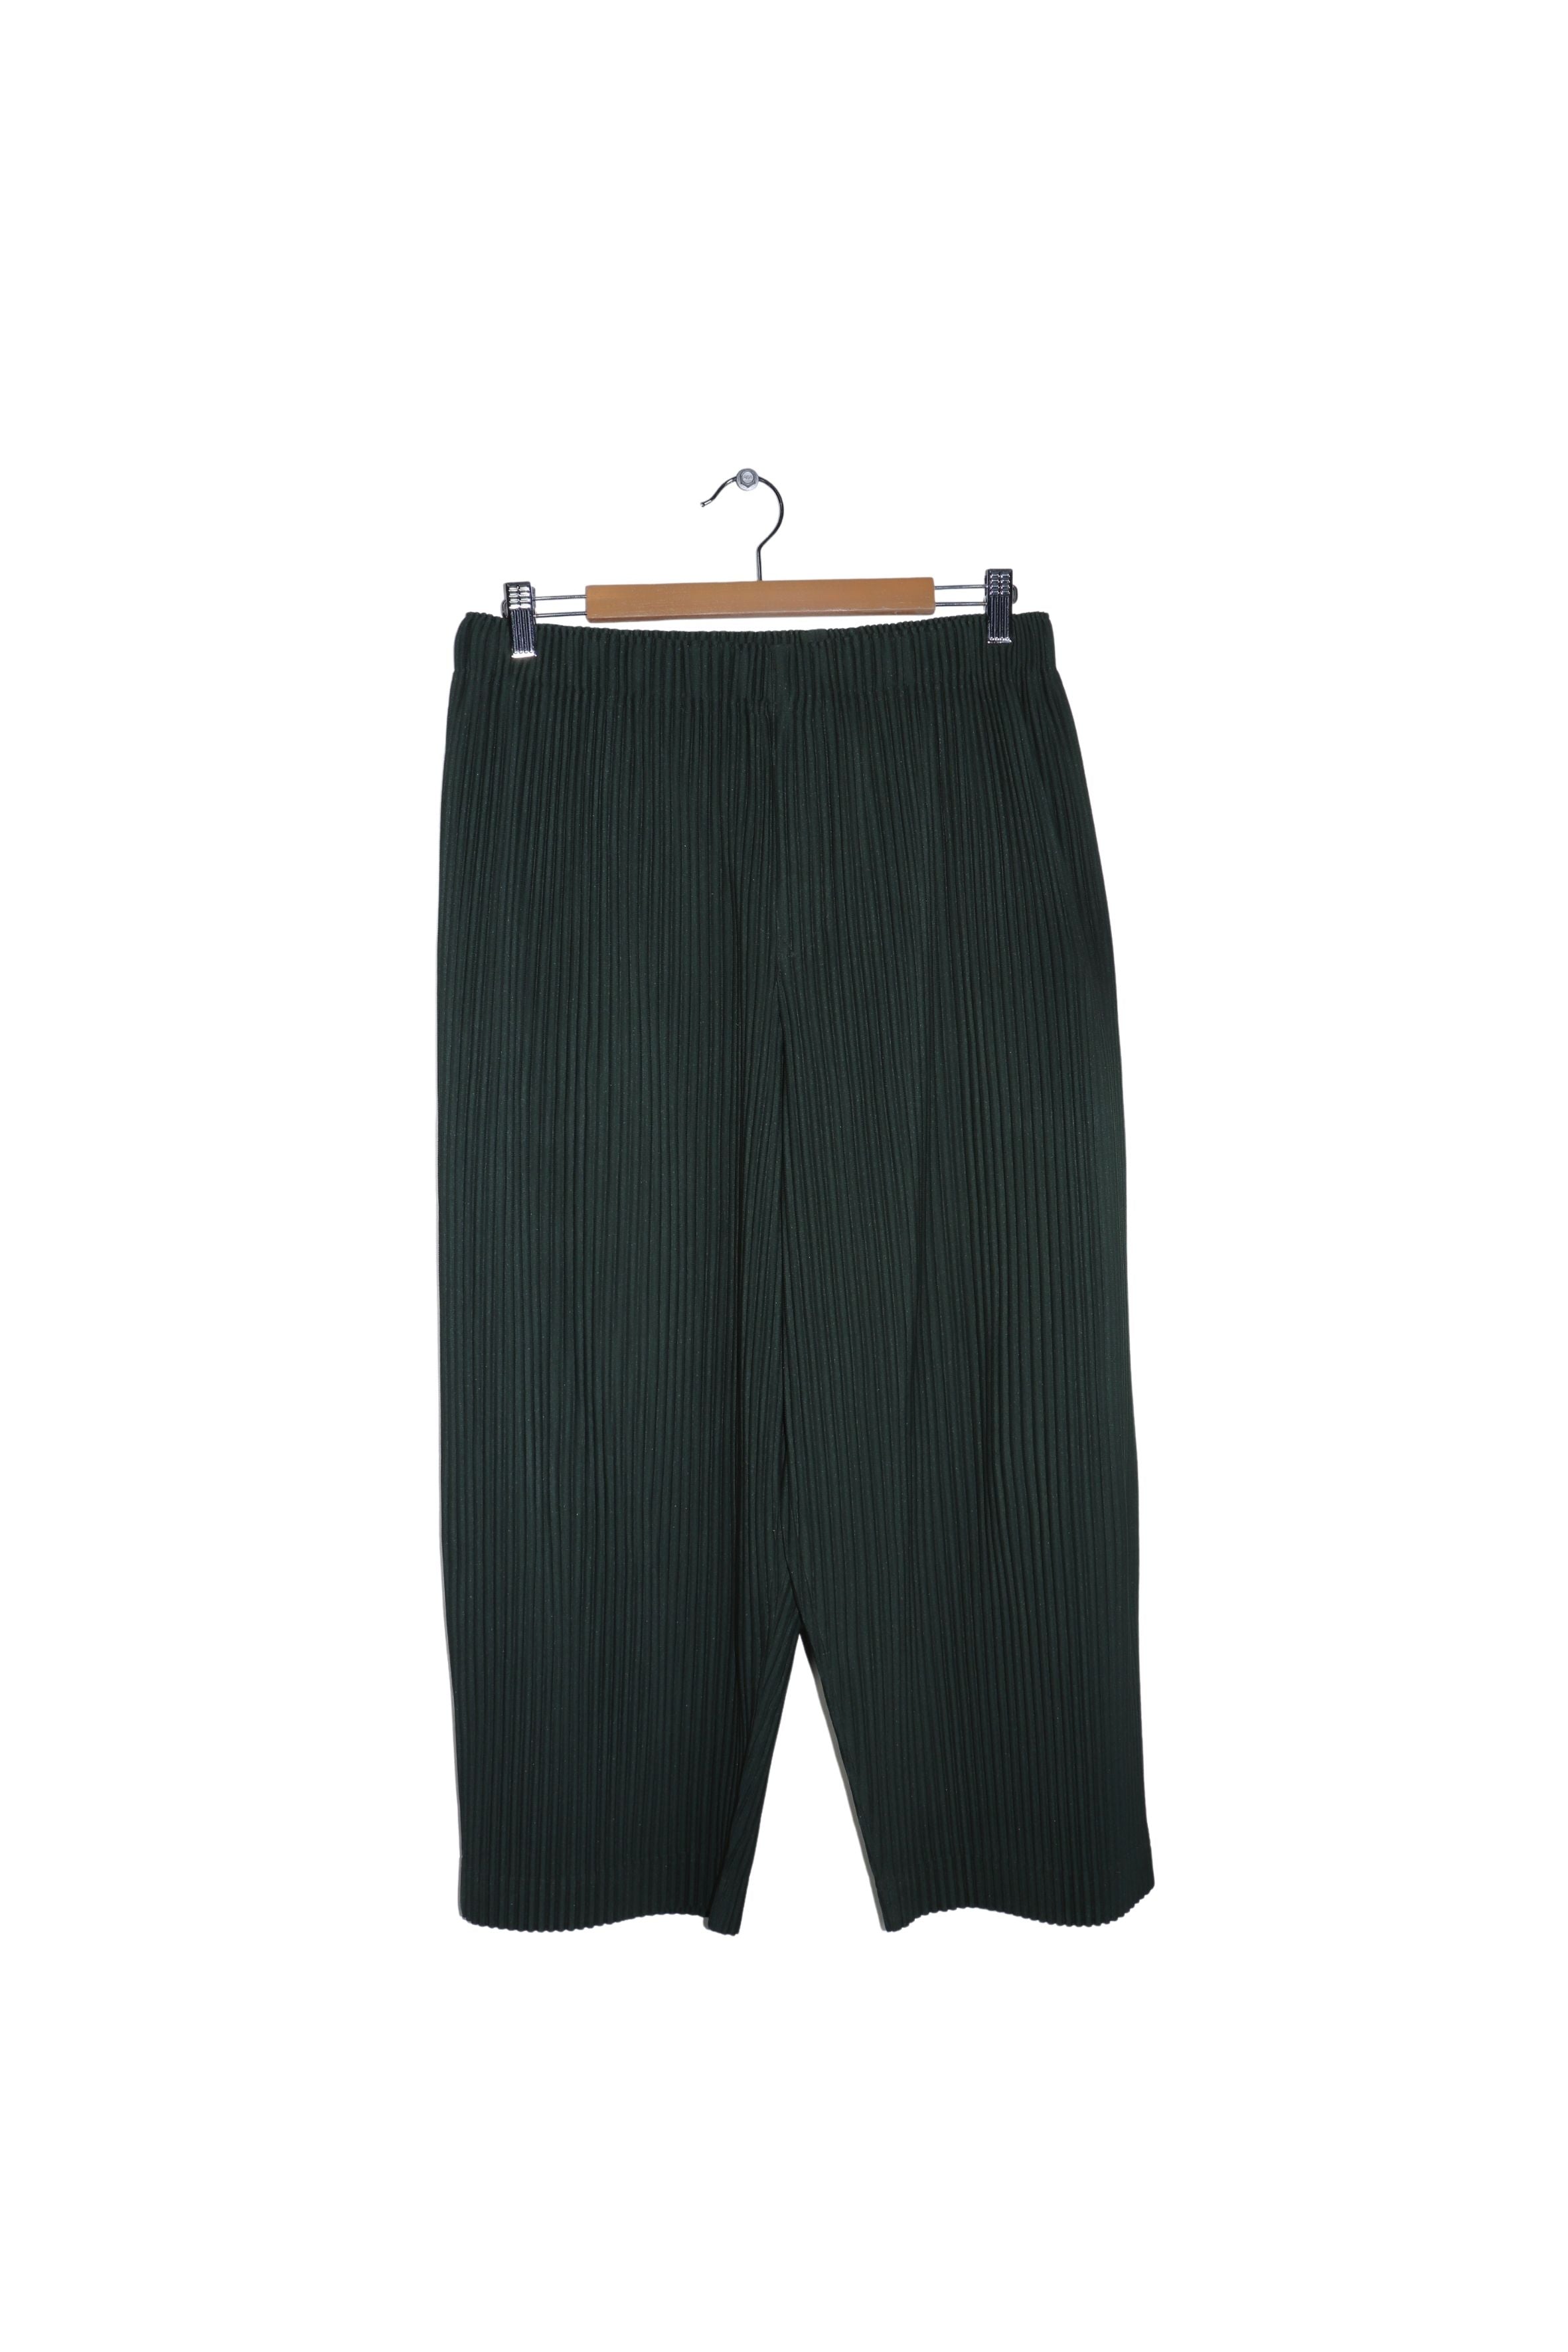 Issey Miyake Homme Plisse Forest Green Pleated Pants